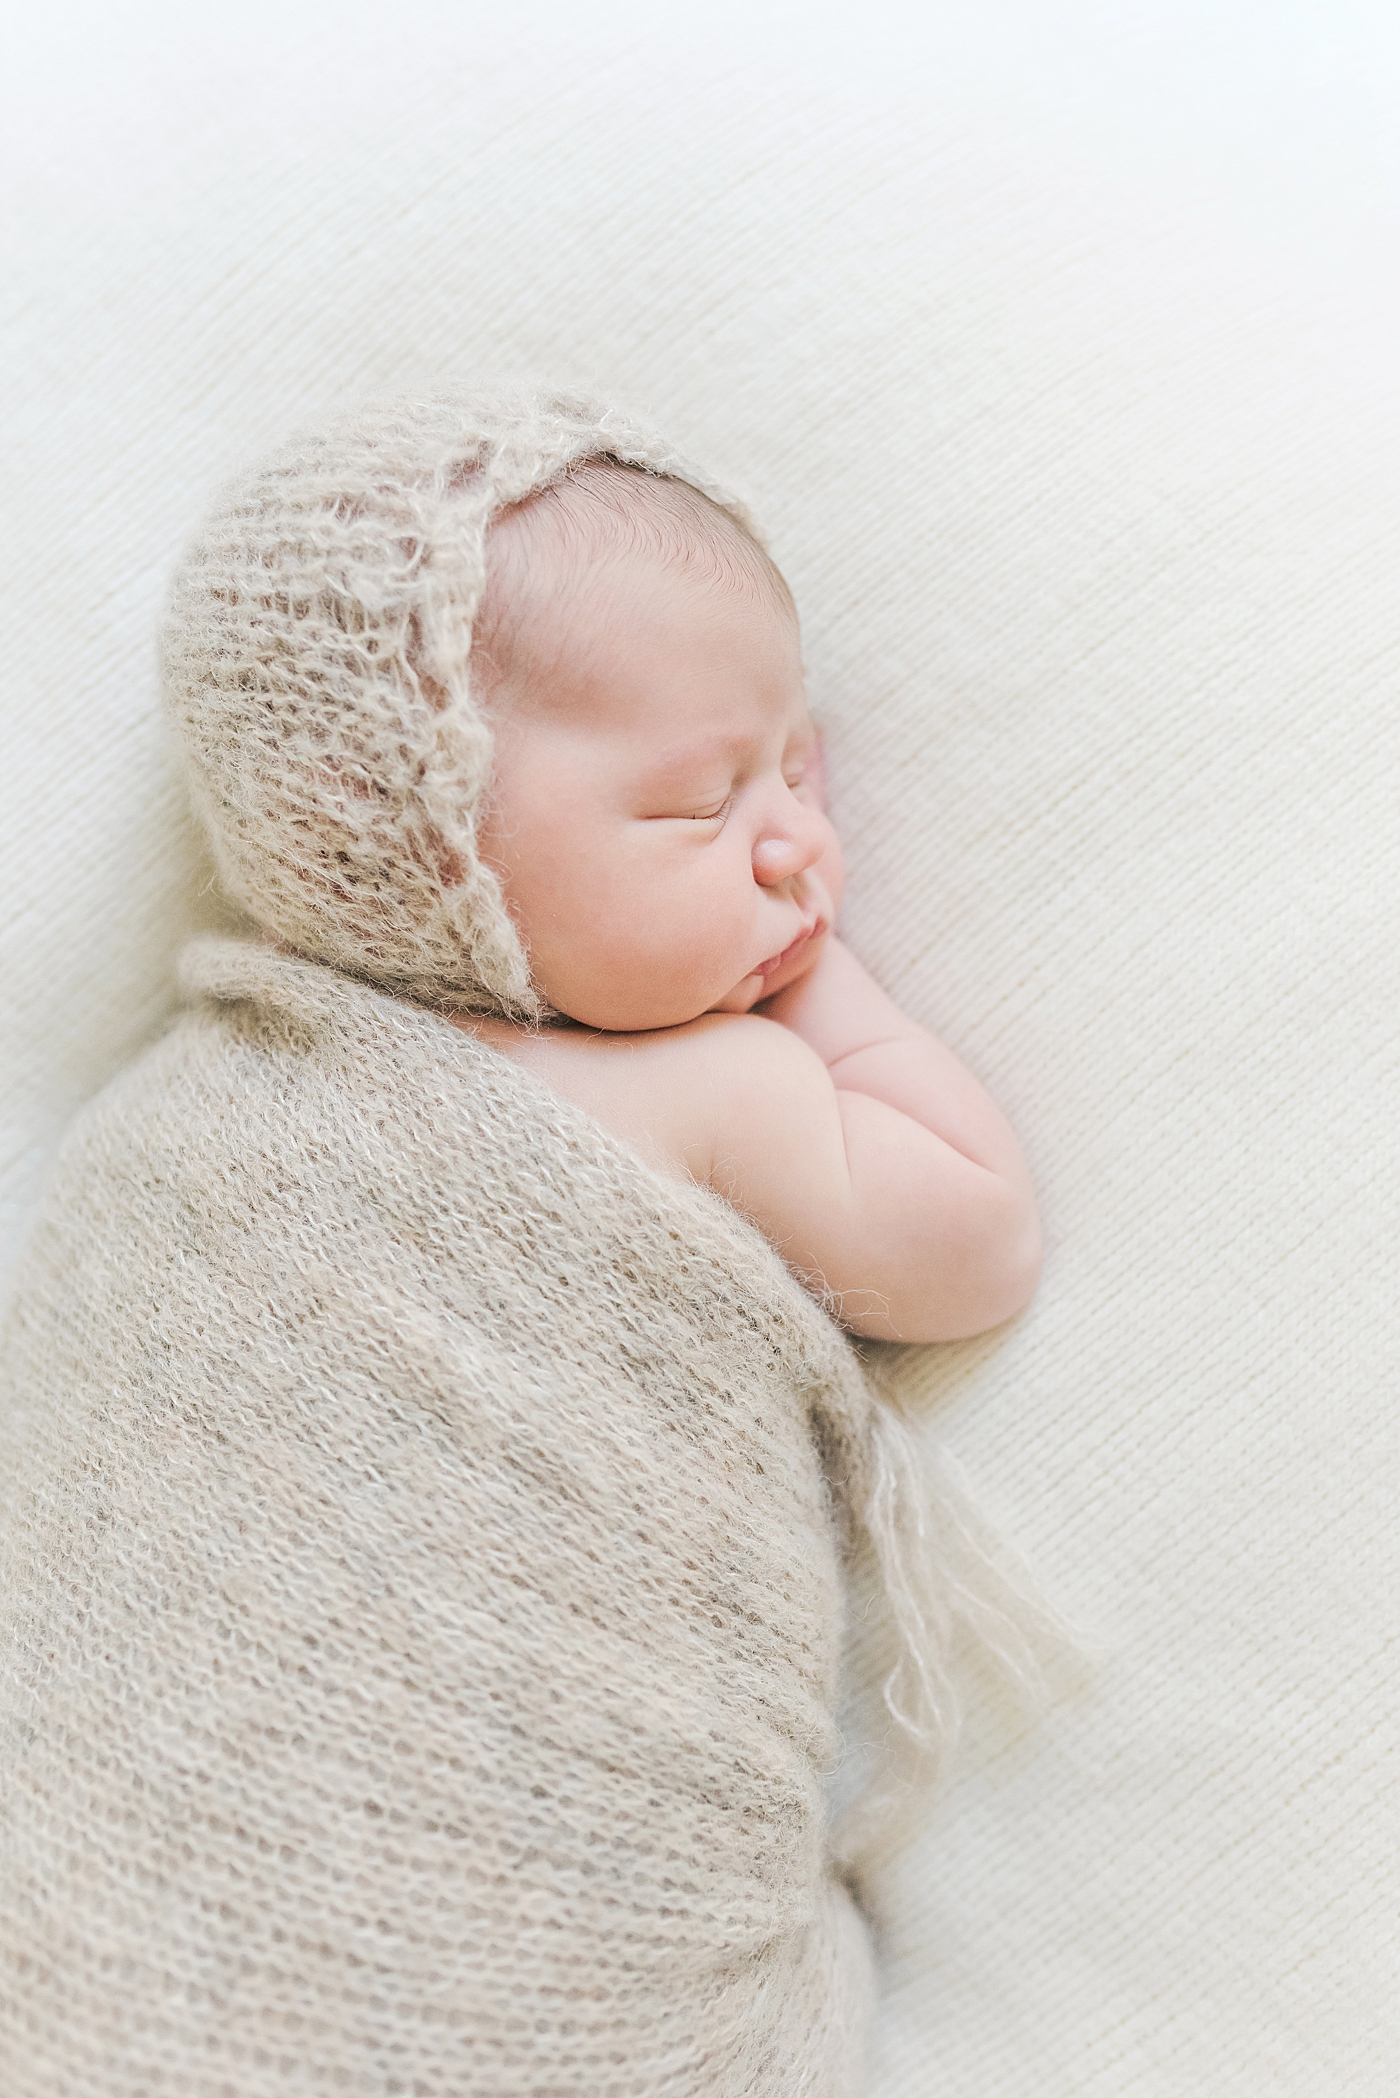 Baby boy in crochet swaddle and bonnet | Anna Wisjo Photography - Baby Photographer Charlotte